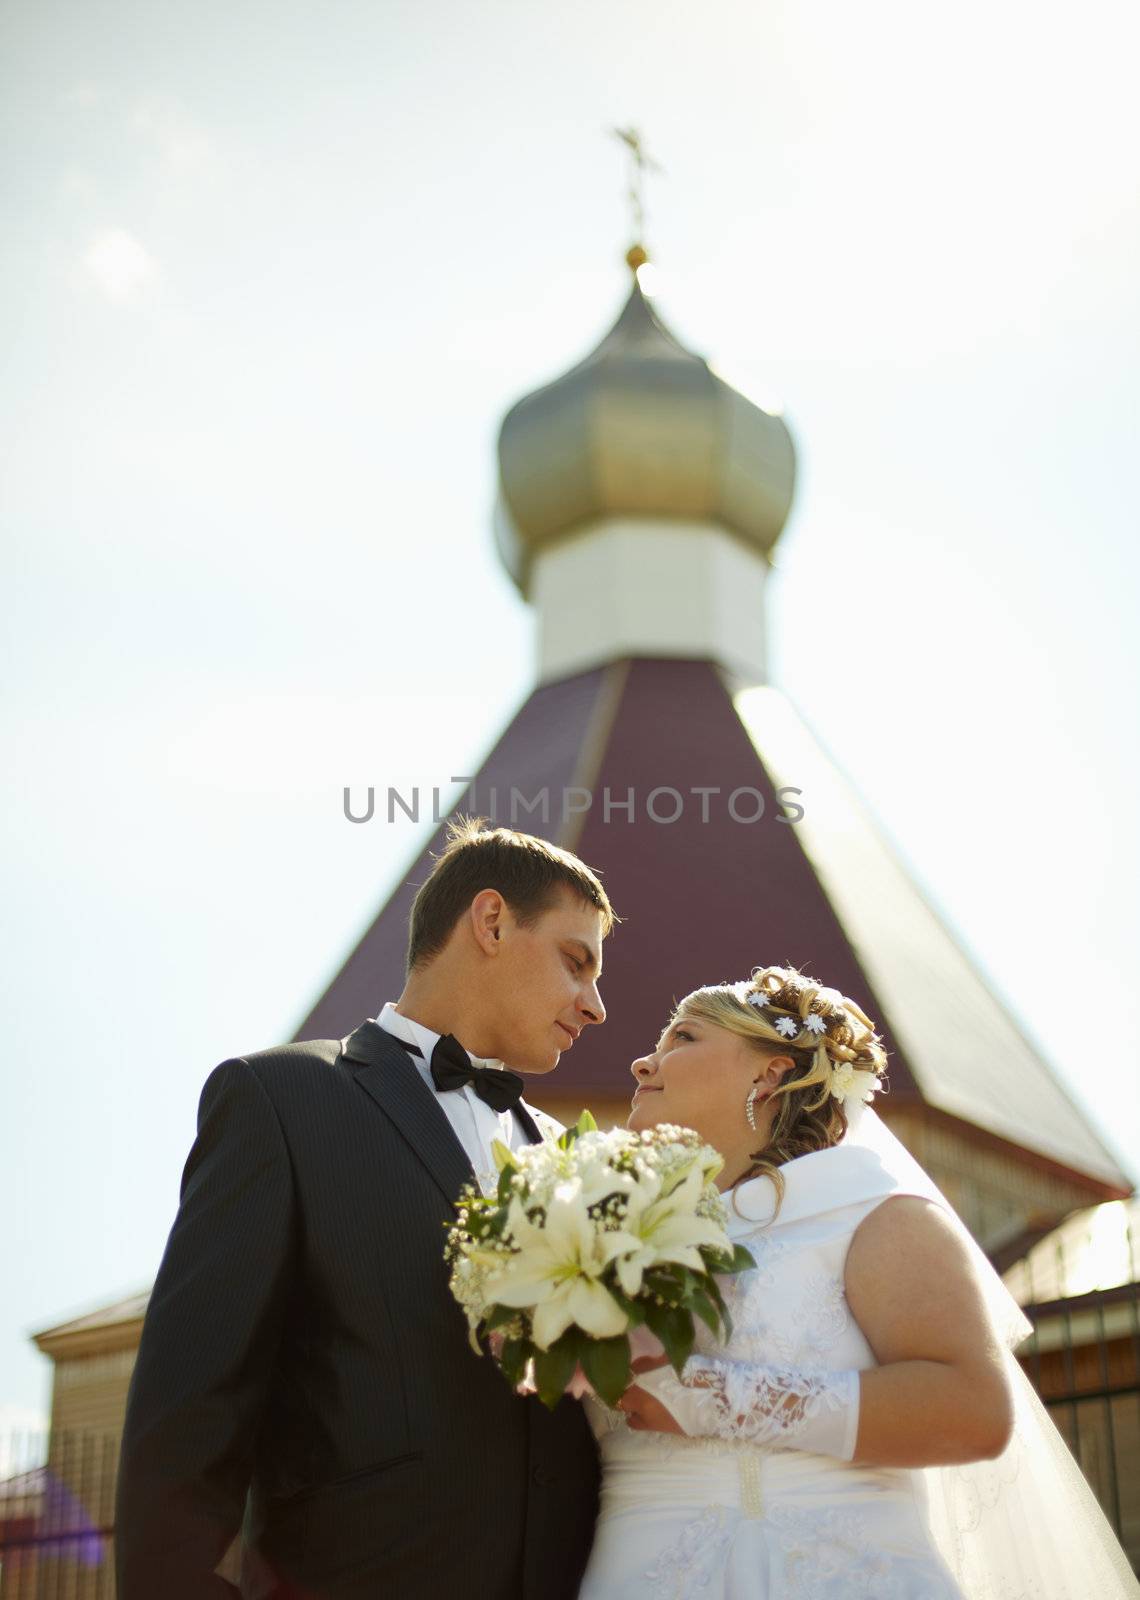 The bride and groom on the background of the Christian Church